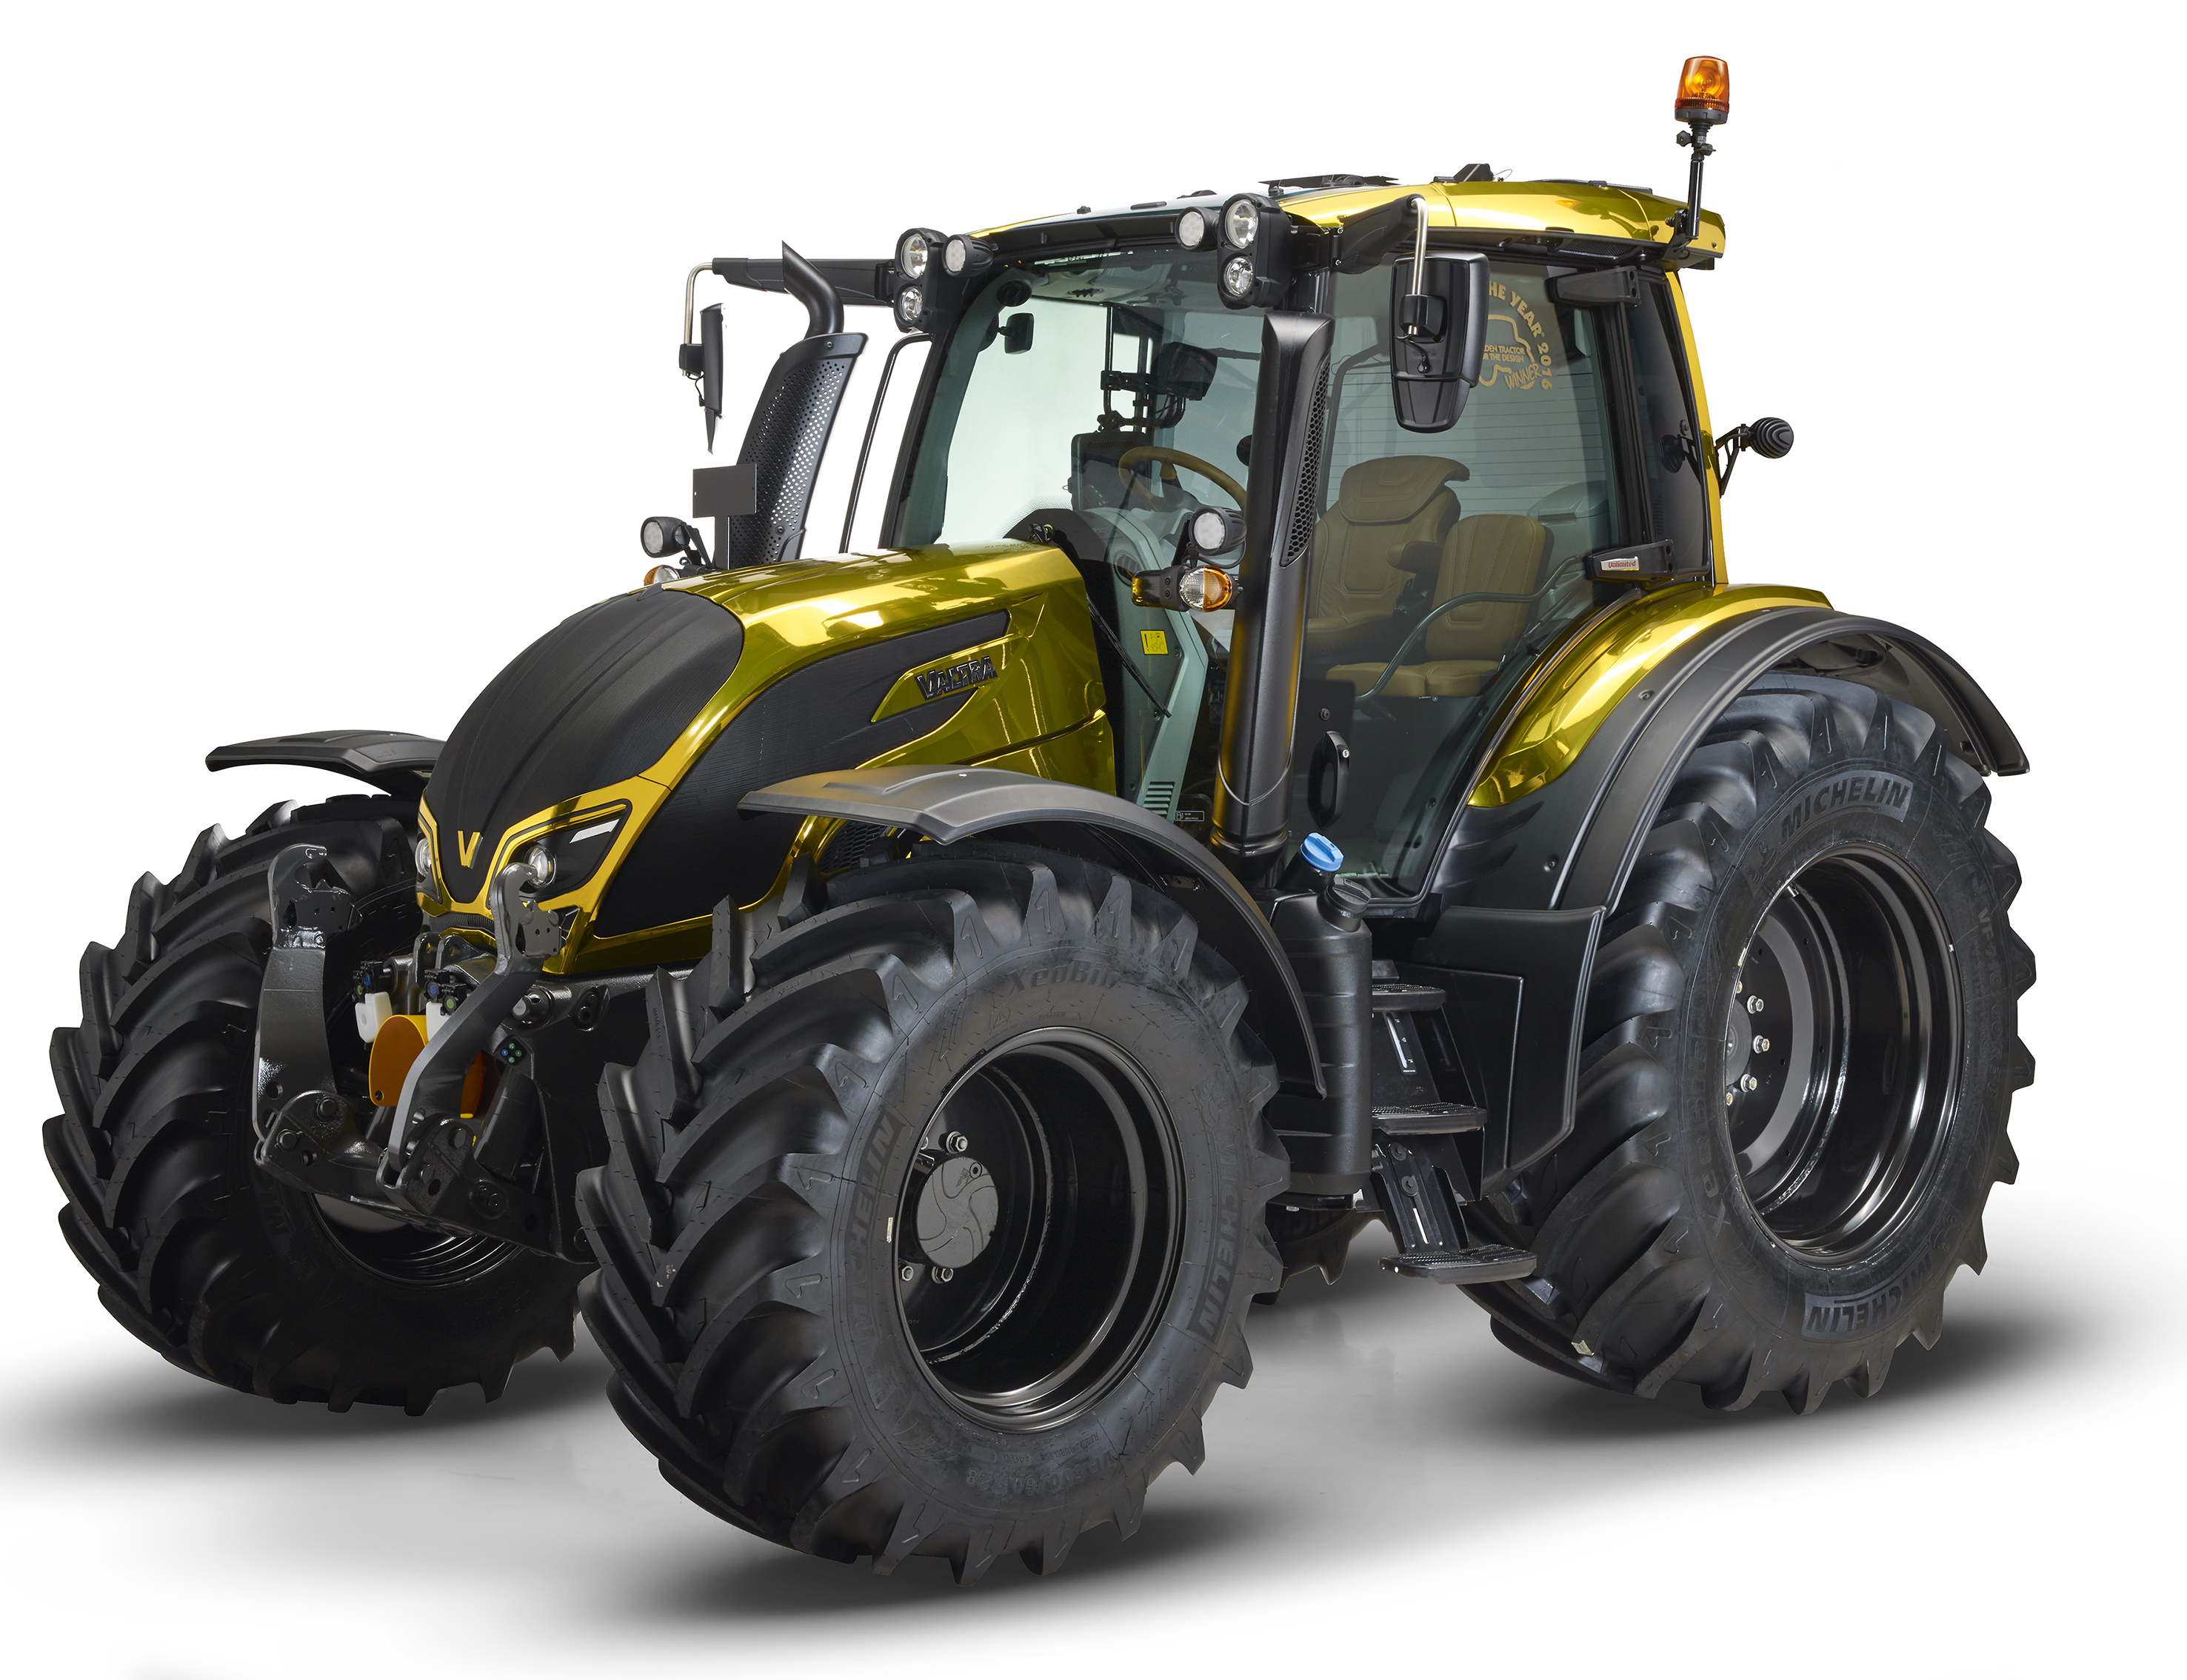 HQ Valtra Wallpapers | File 2741.15Kb